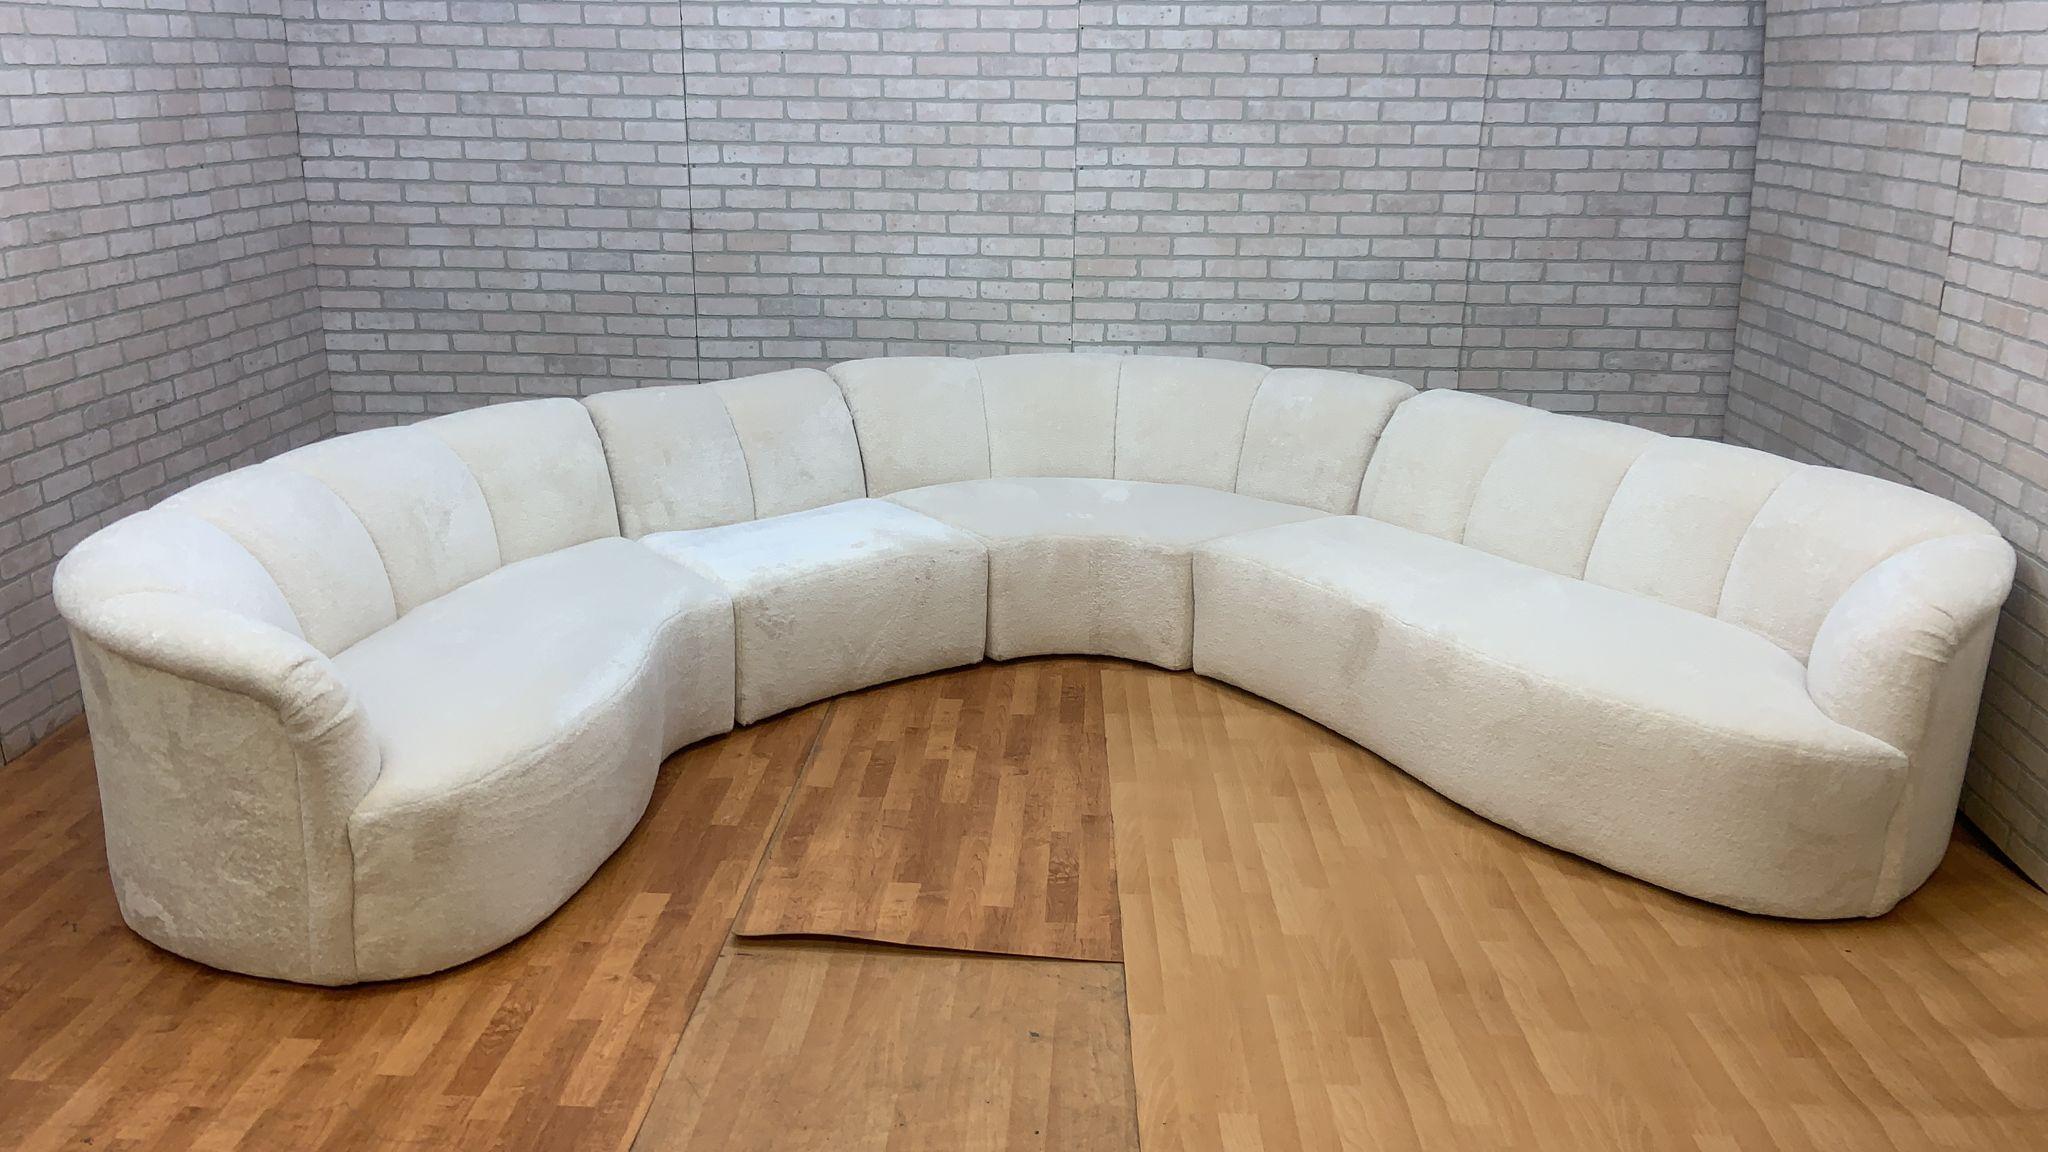 Curved Channel Back Serpentine Sectional Sofa Newly Upholstered in Alpaca Wool 3